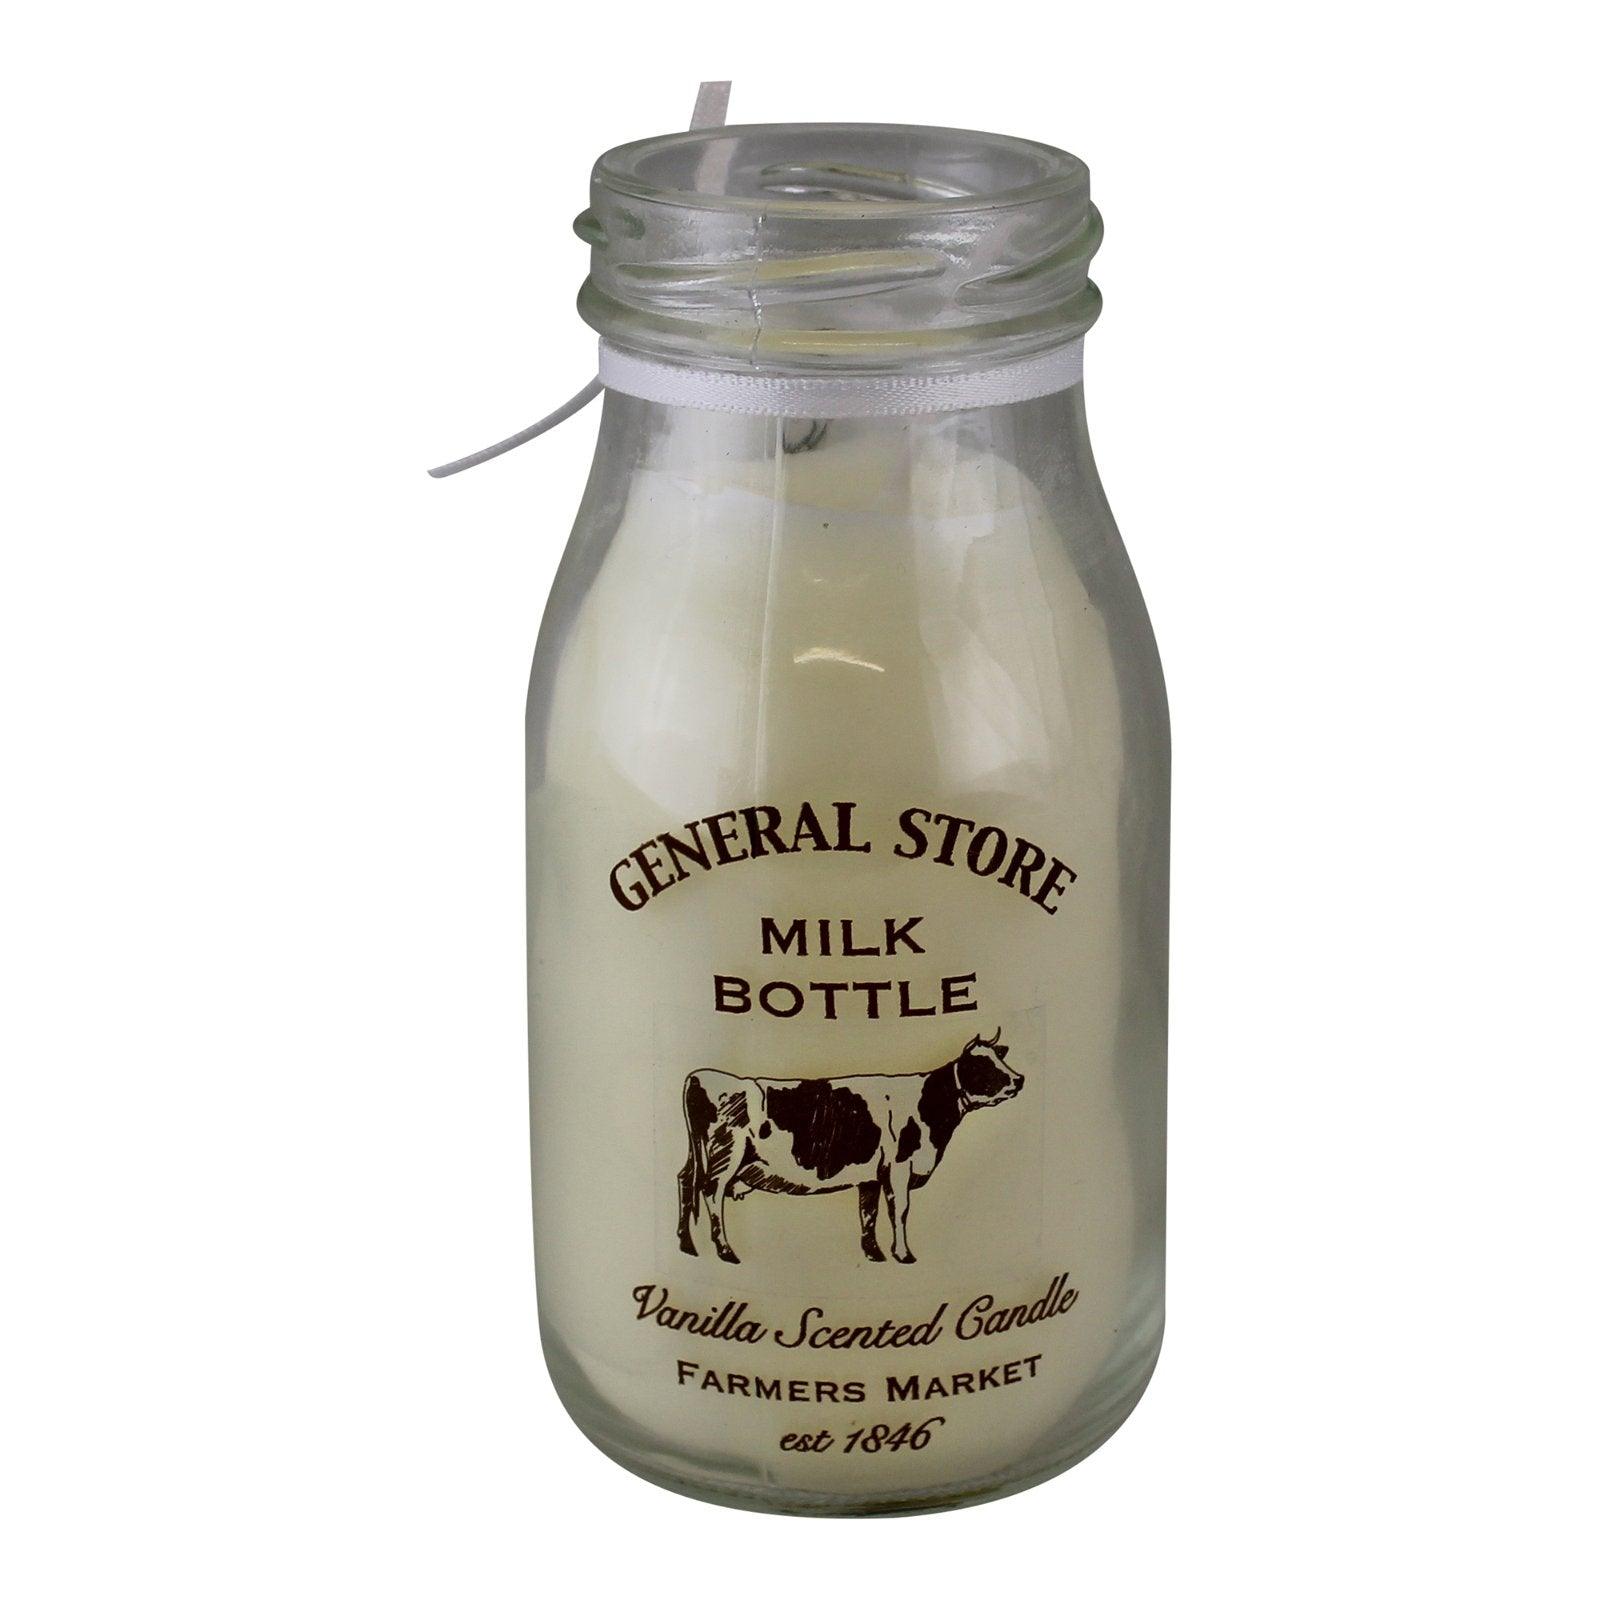 Vanilla Scented Milk Bottle Candle - £15.99 - Candles 